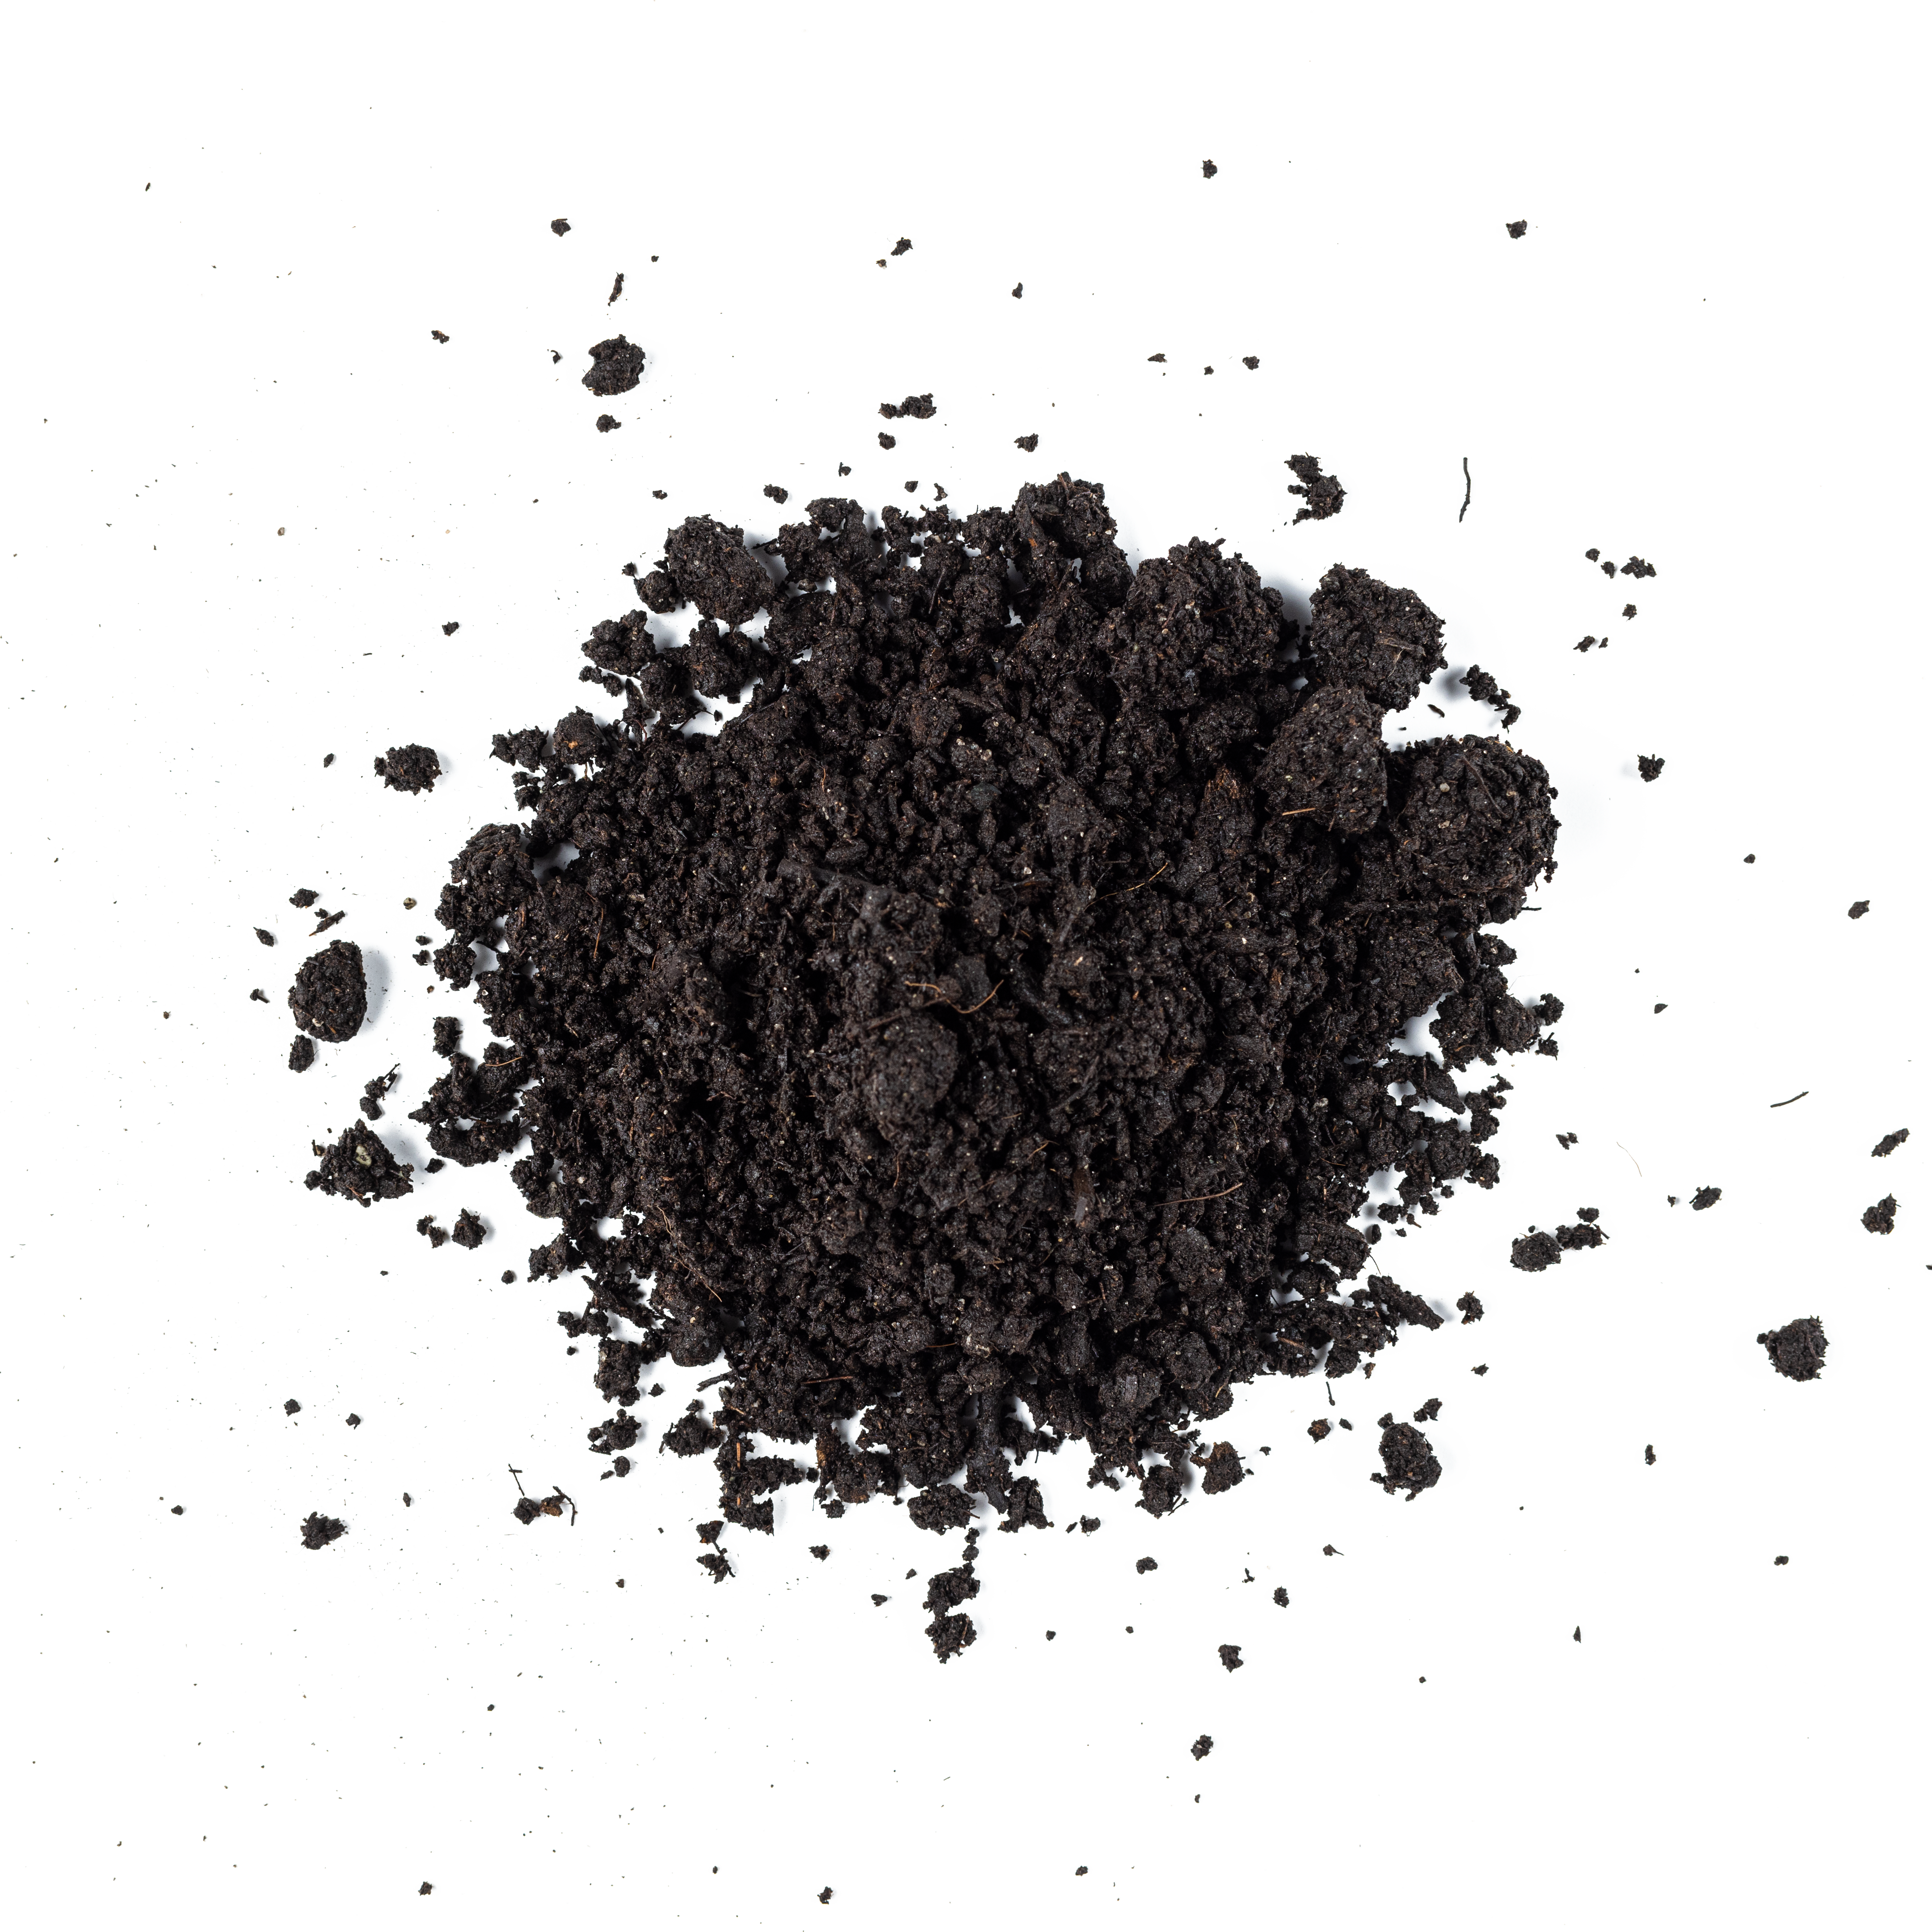 rich, dark, and earthy pile of Manure Compost on white backdrop